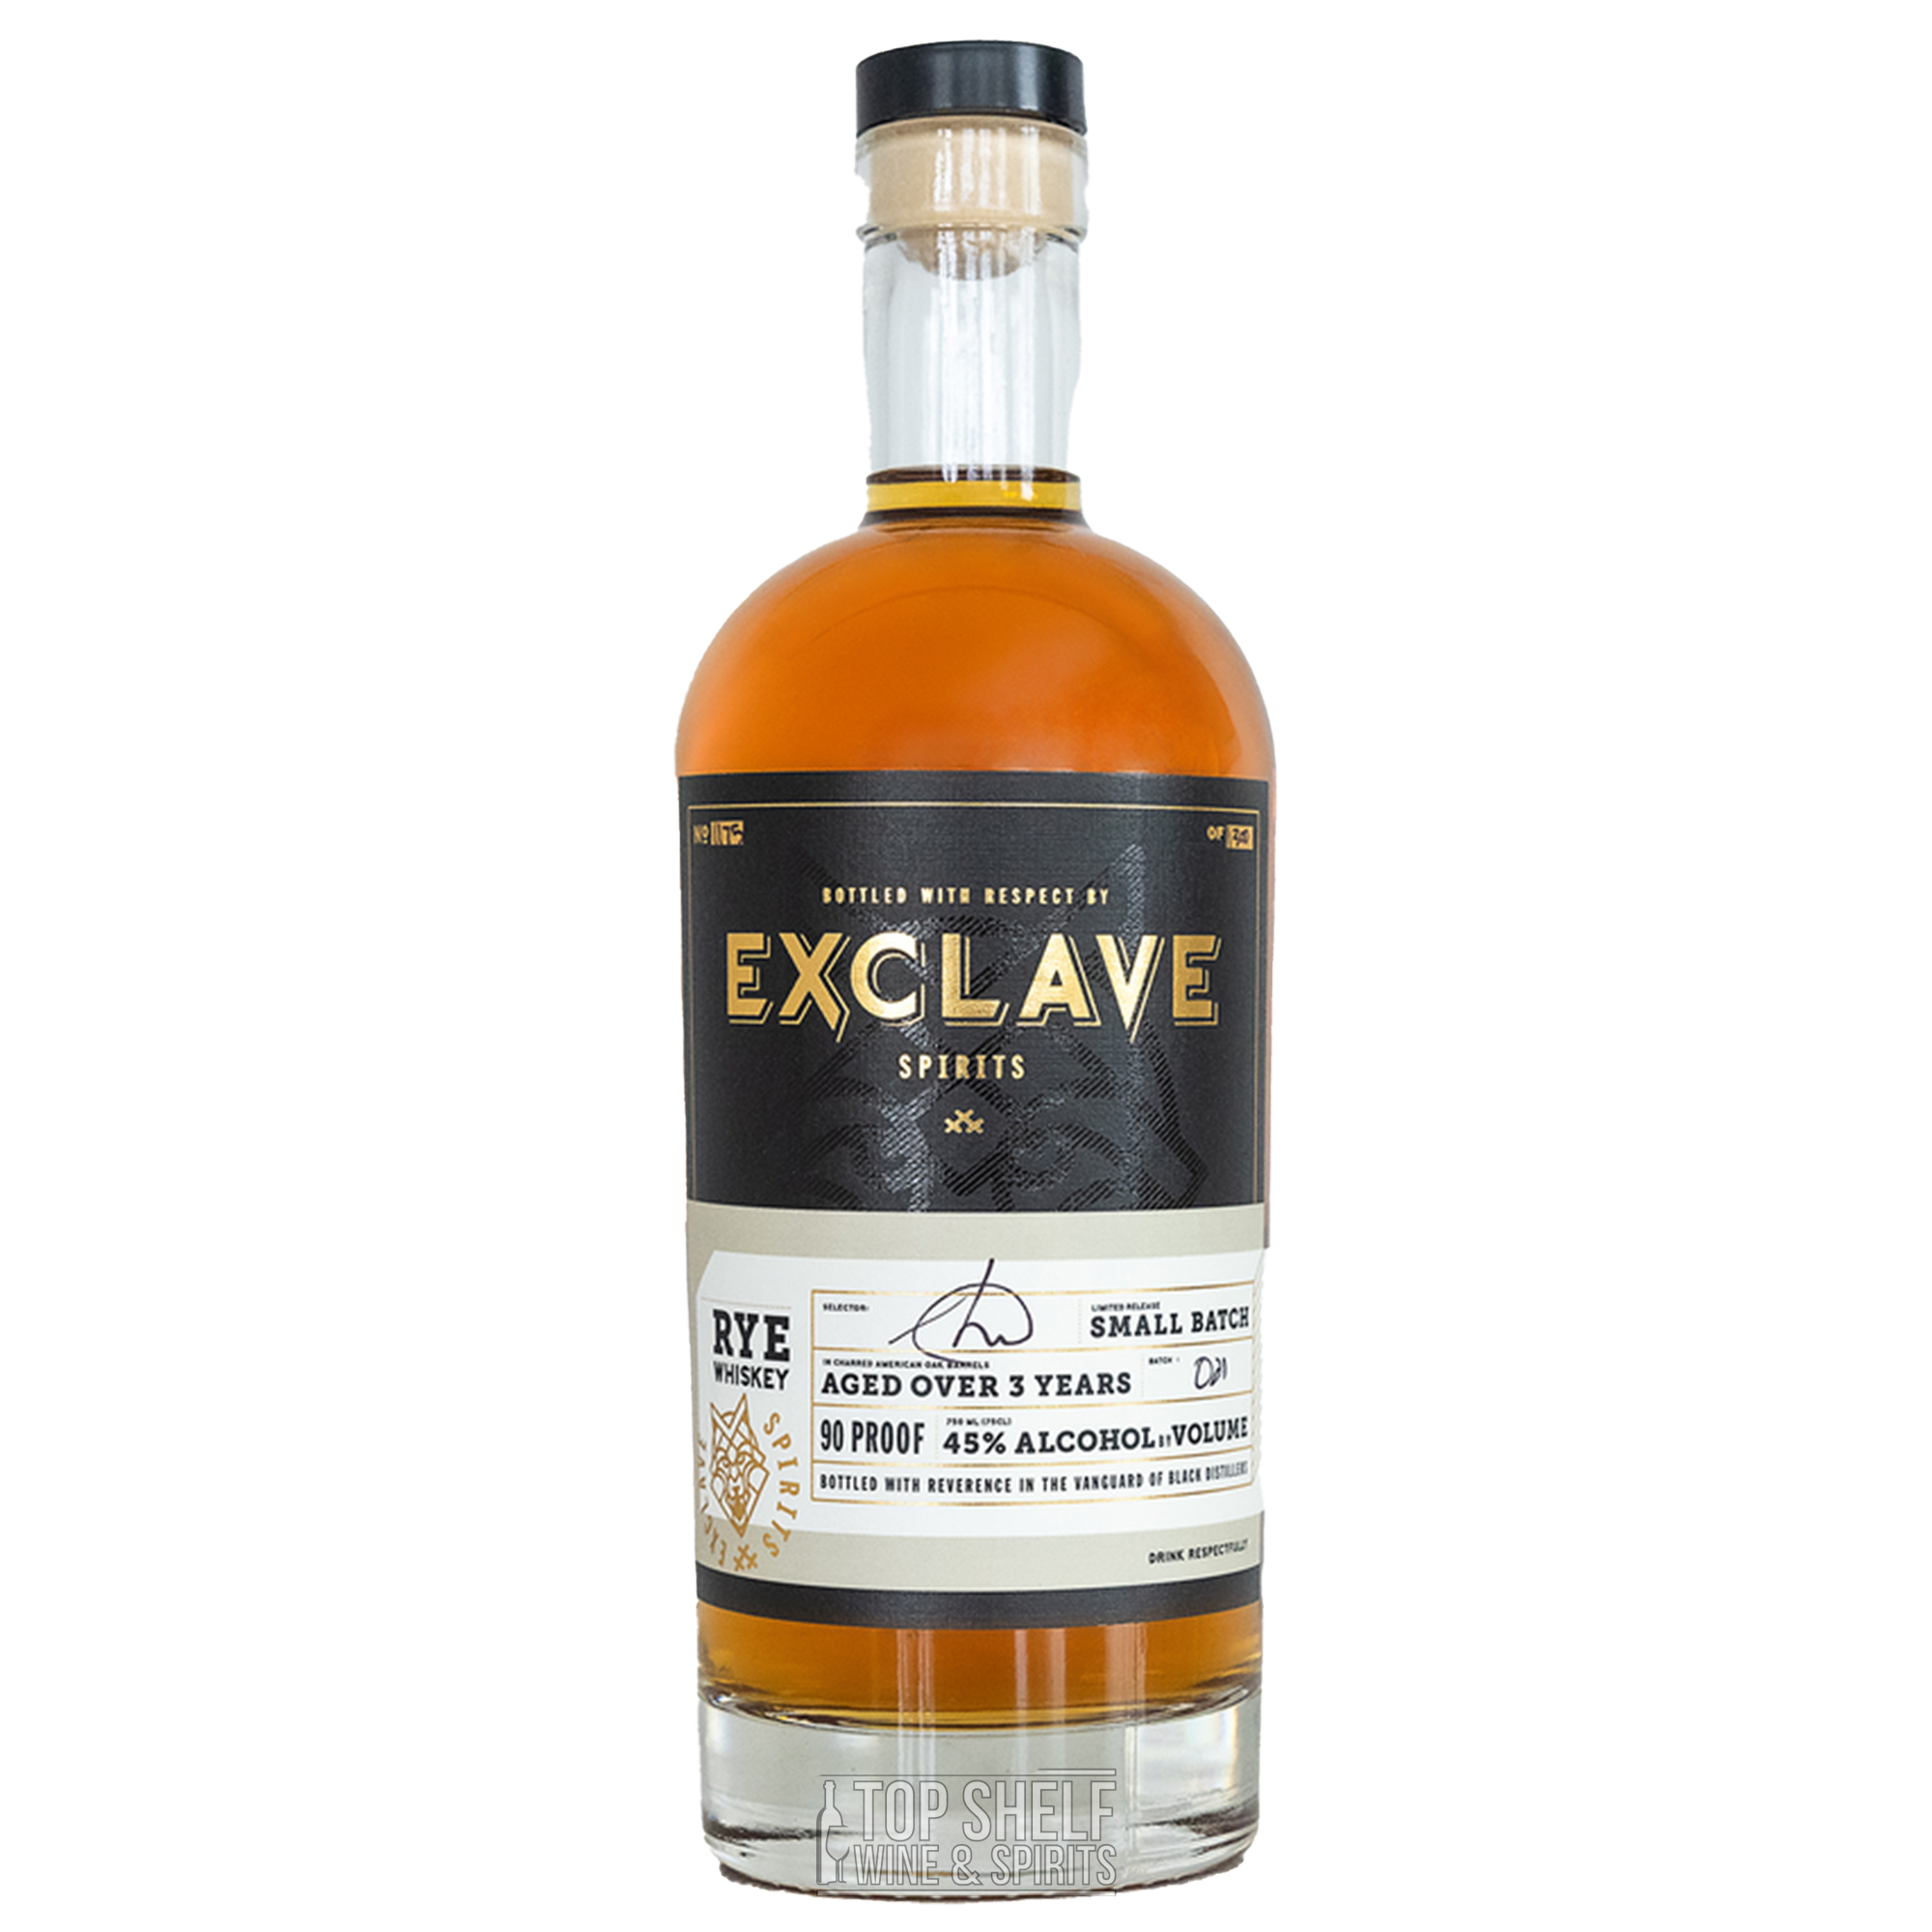 Exclave Spirits Small Batch Rye 3 Year